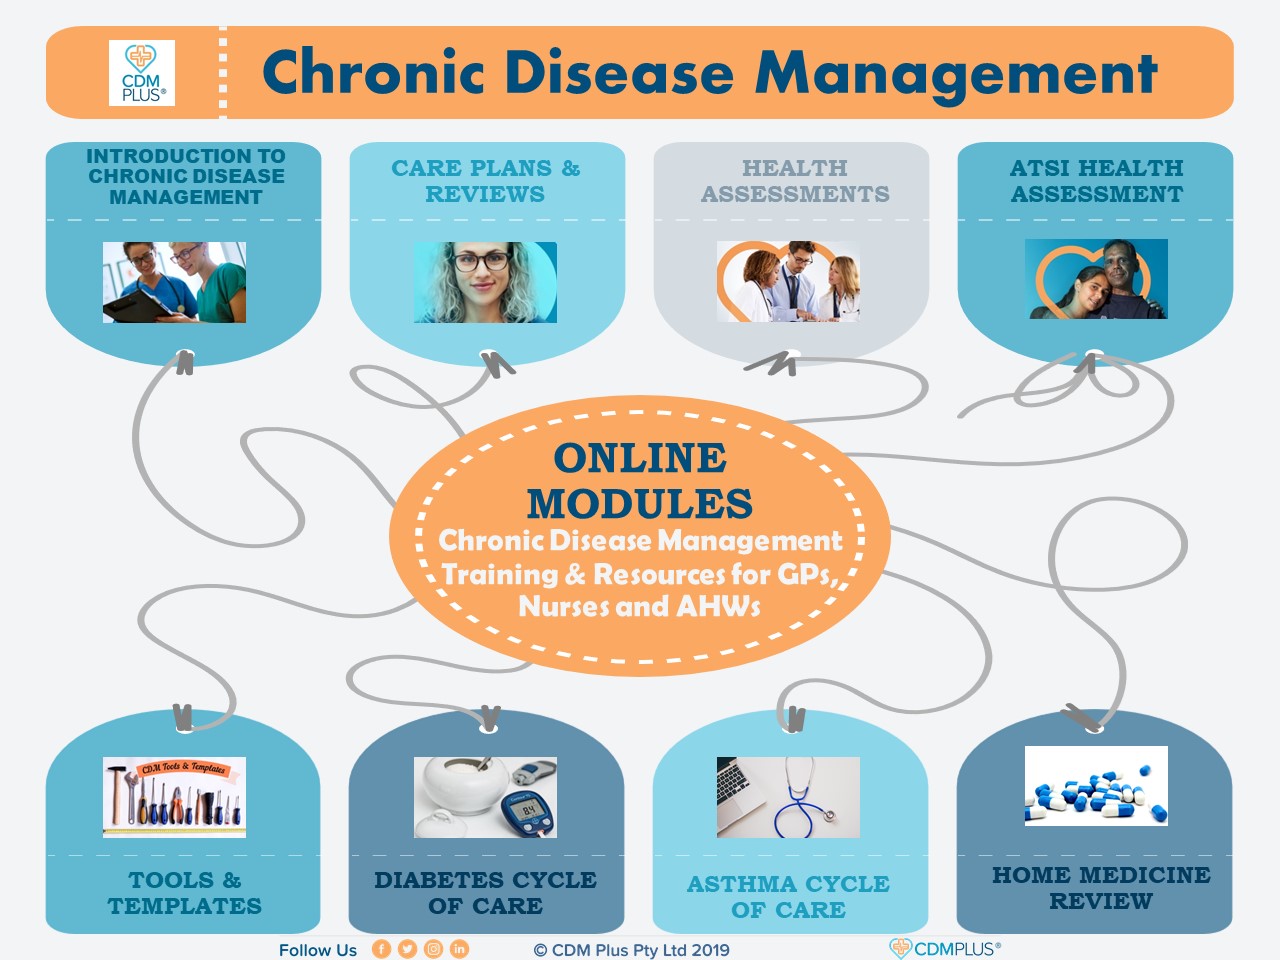 Importance of preventive healthcare for chronic disease management